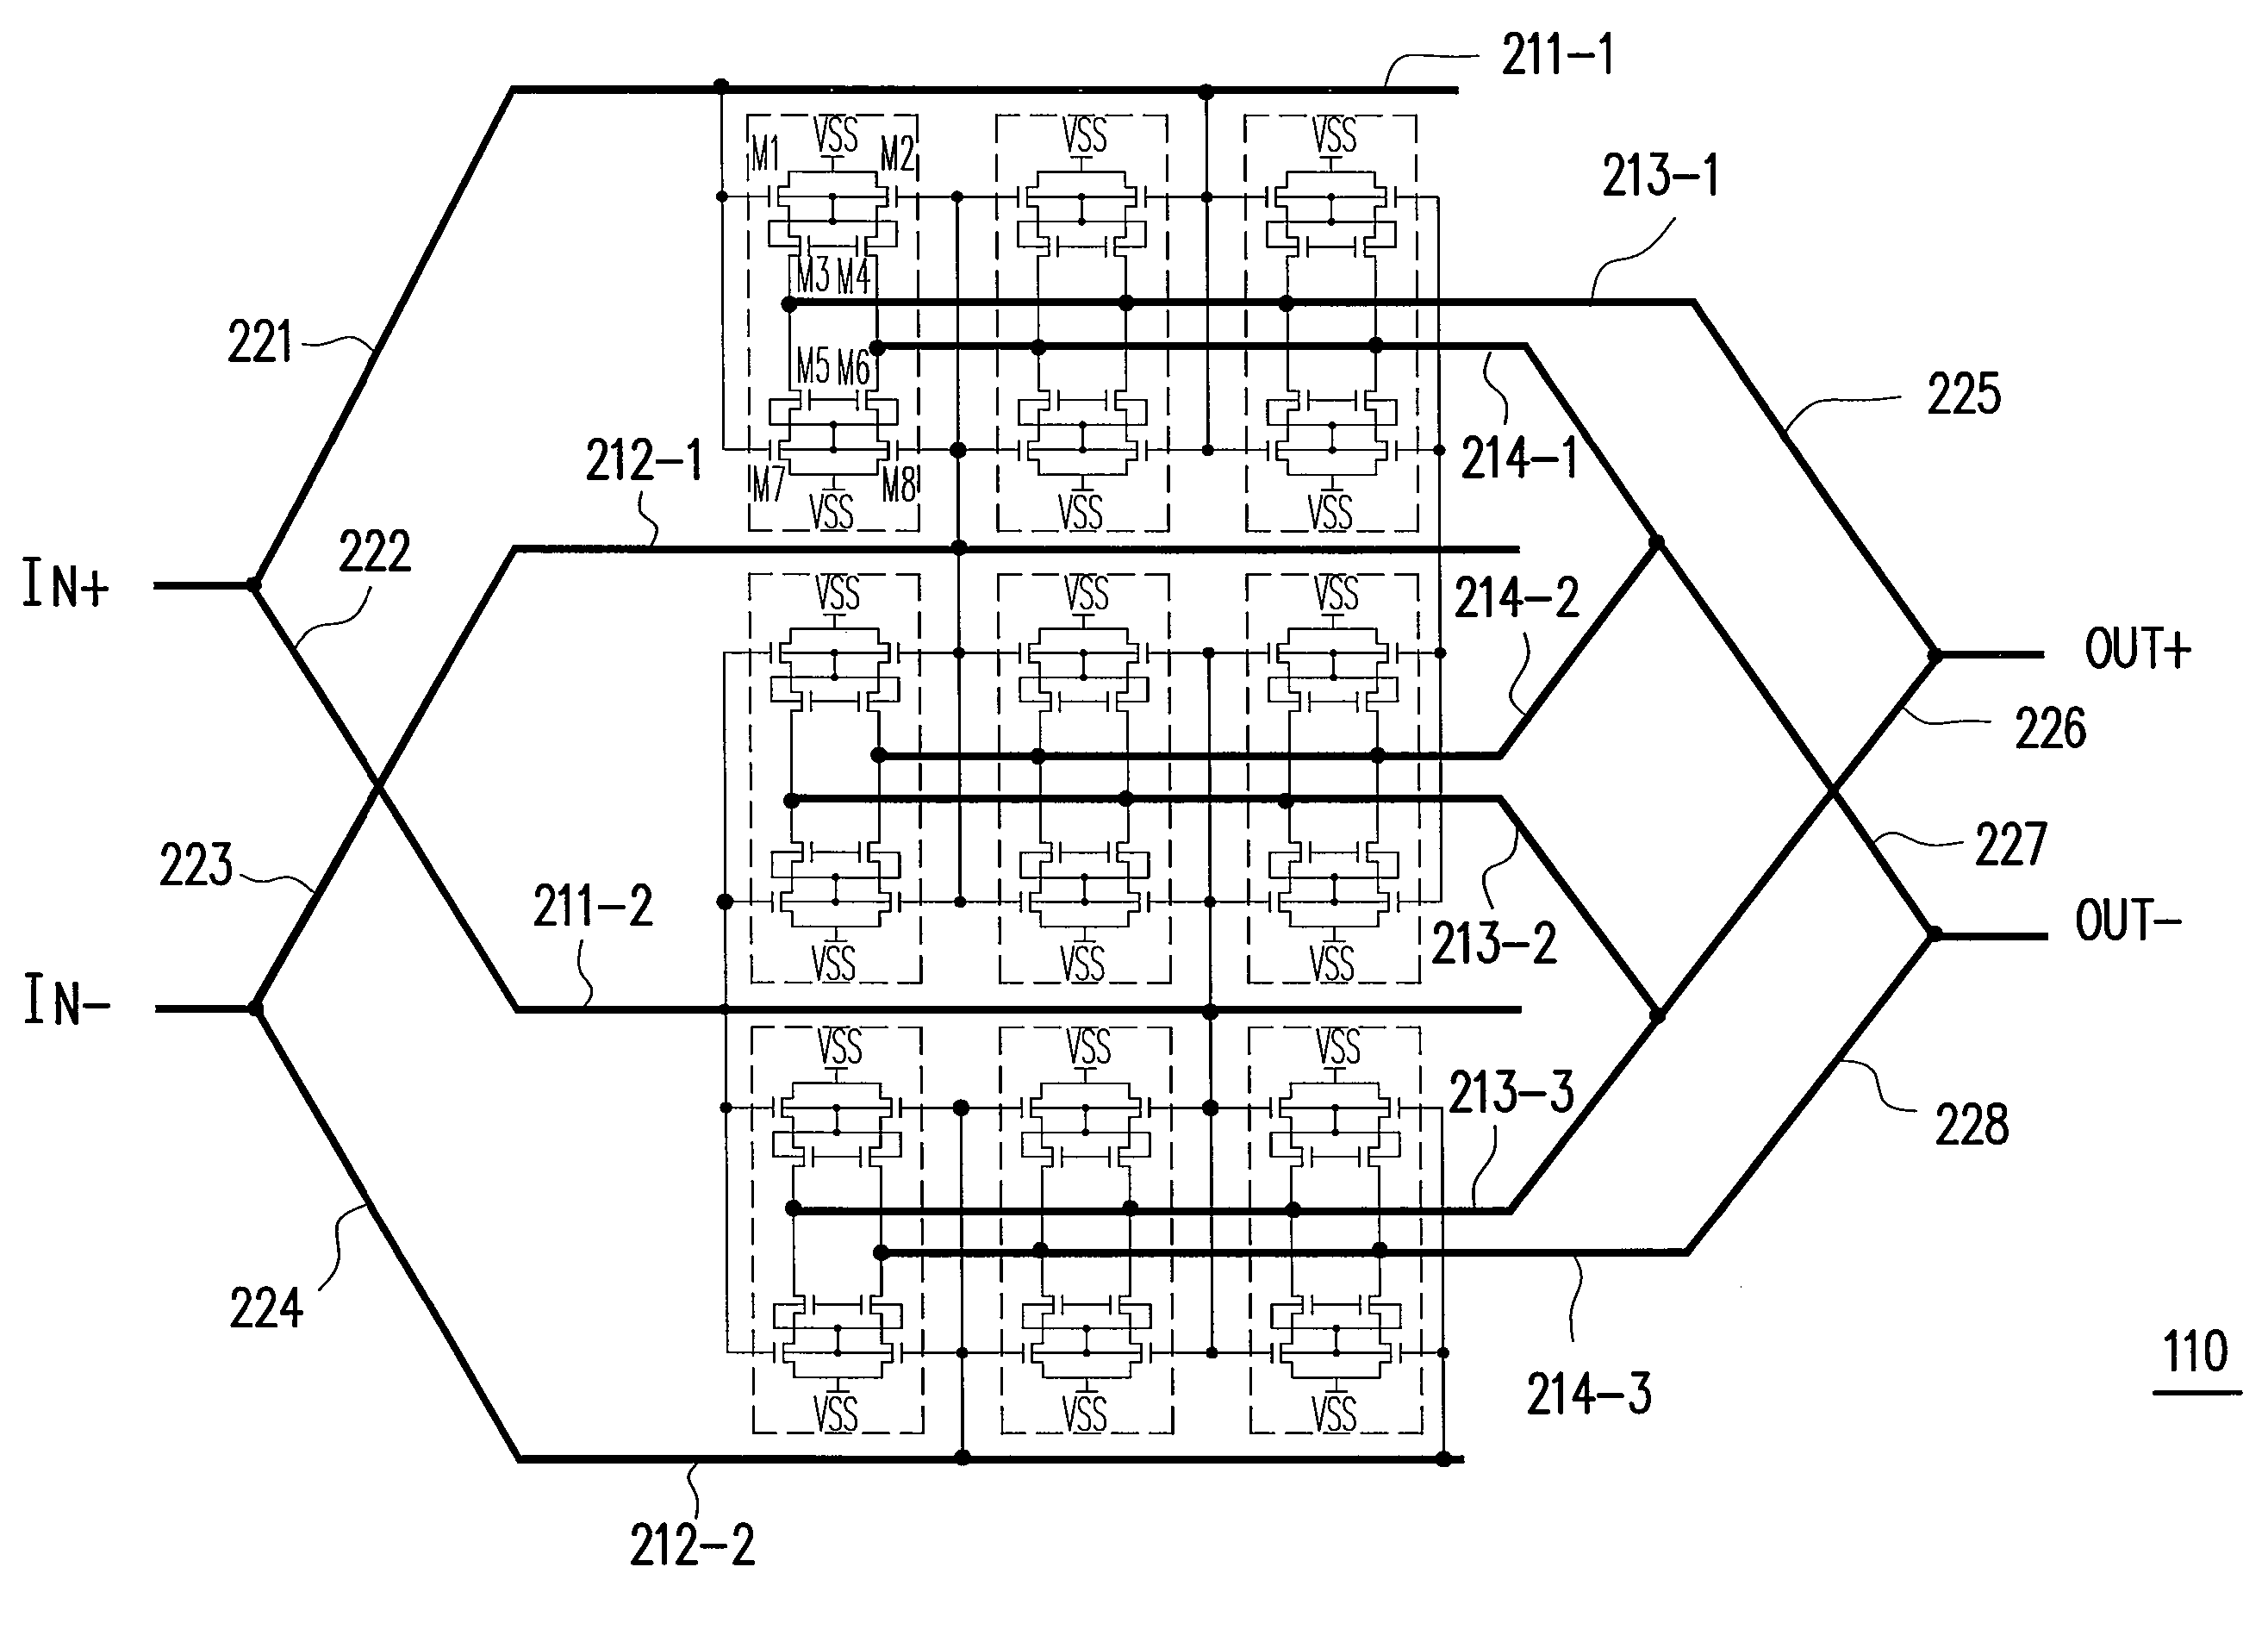 Layout of power device